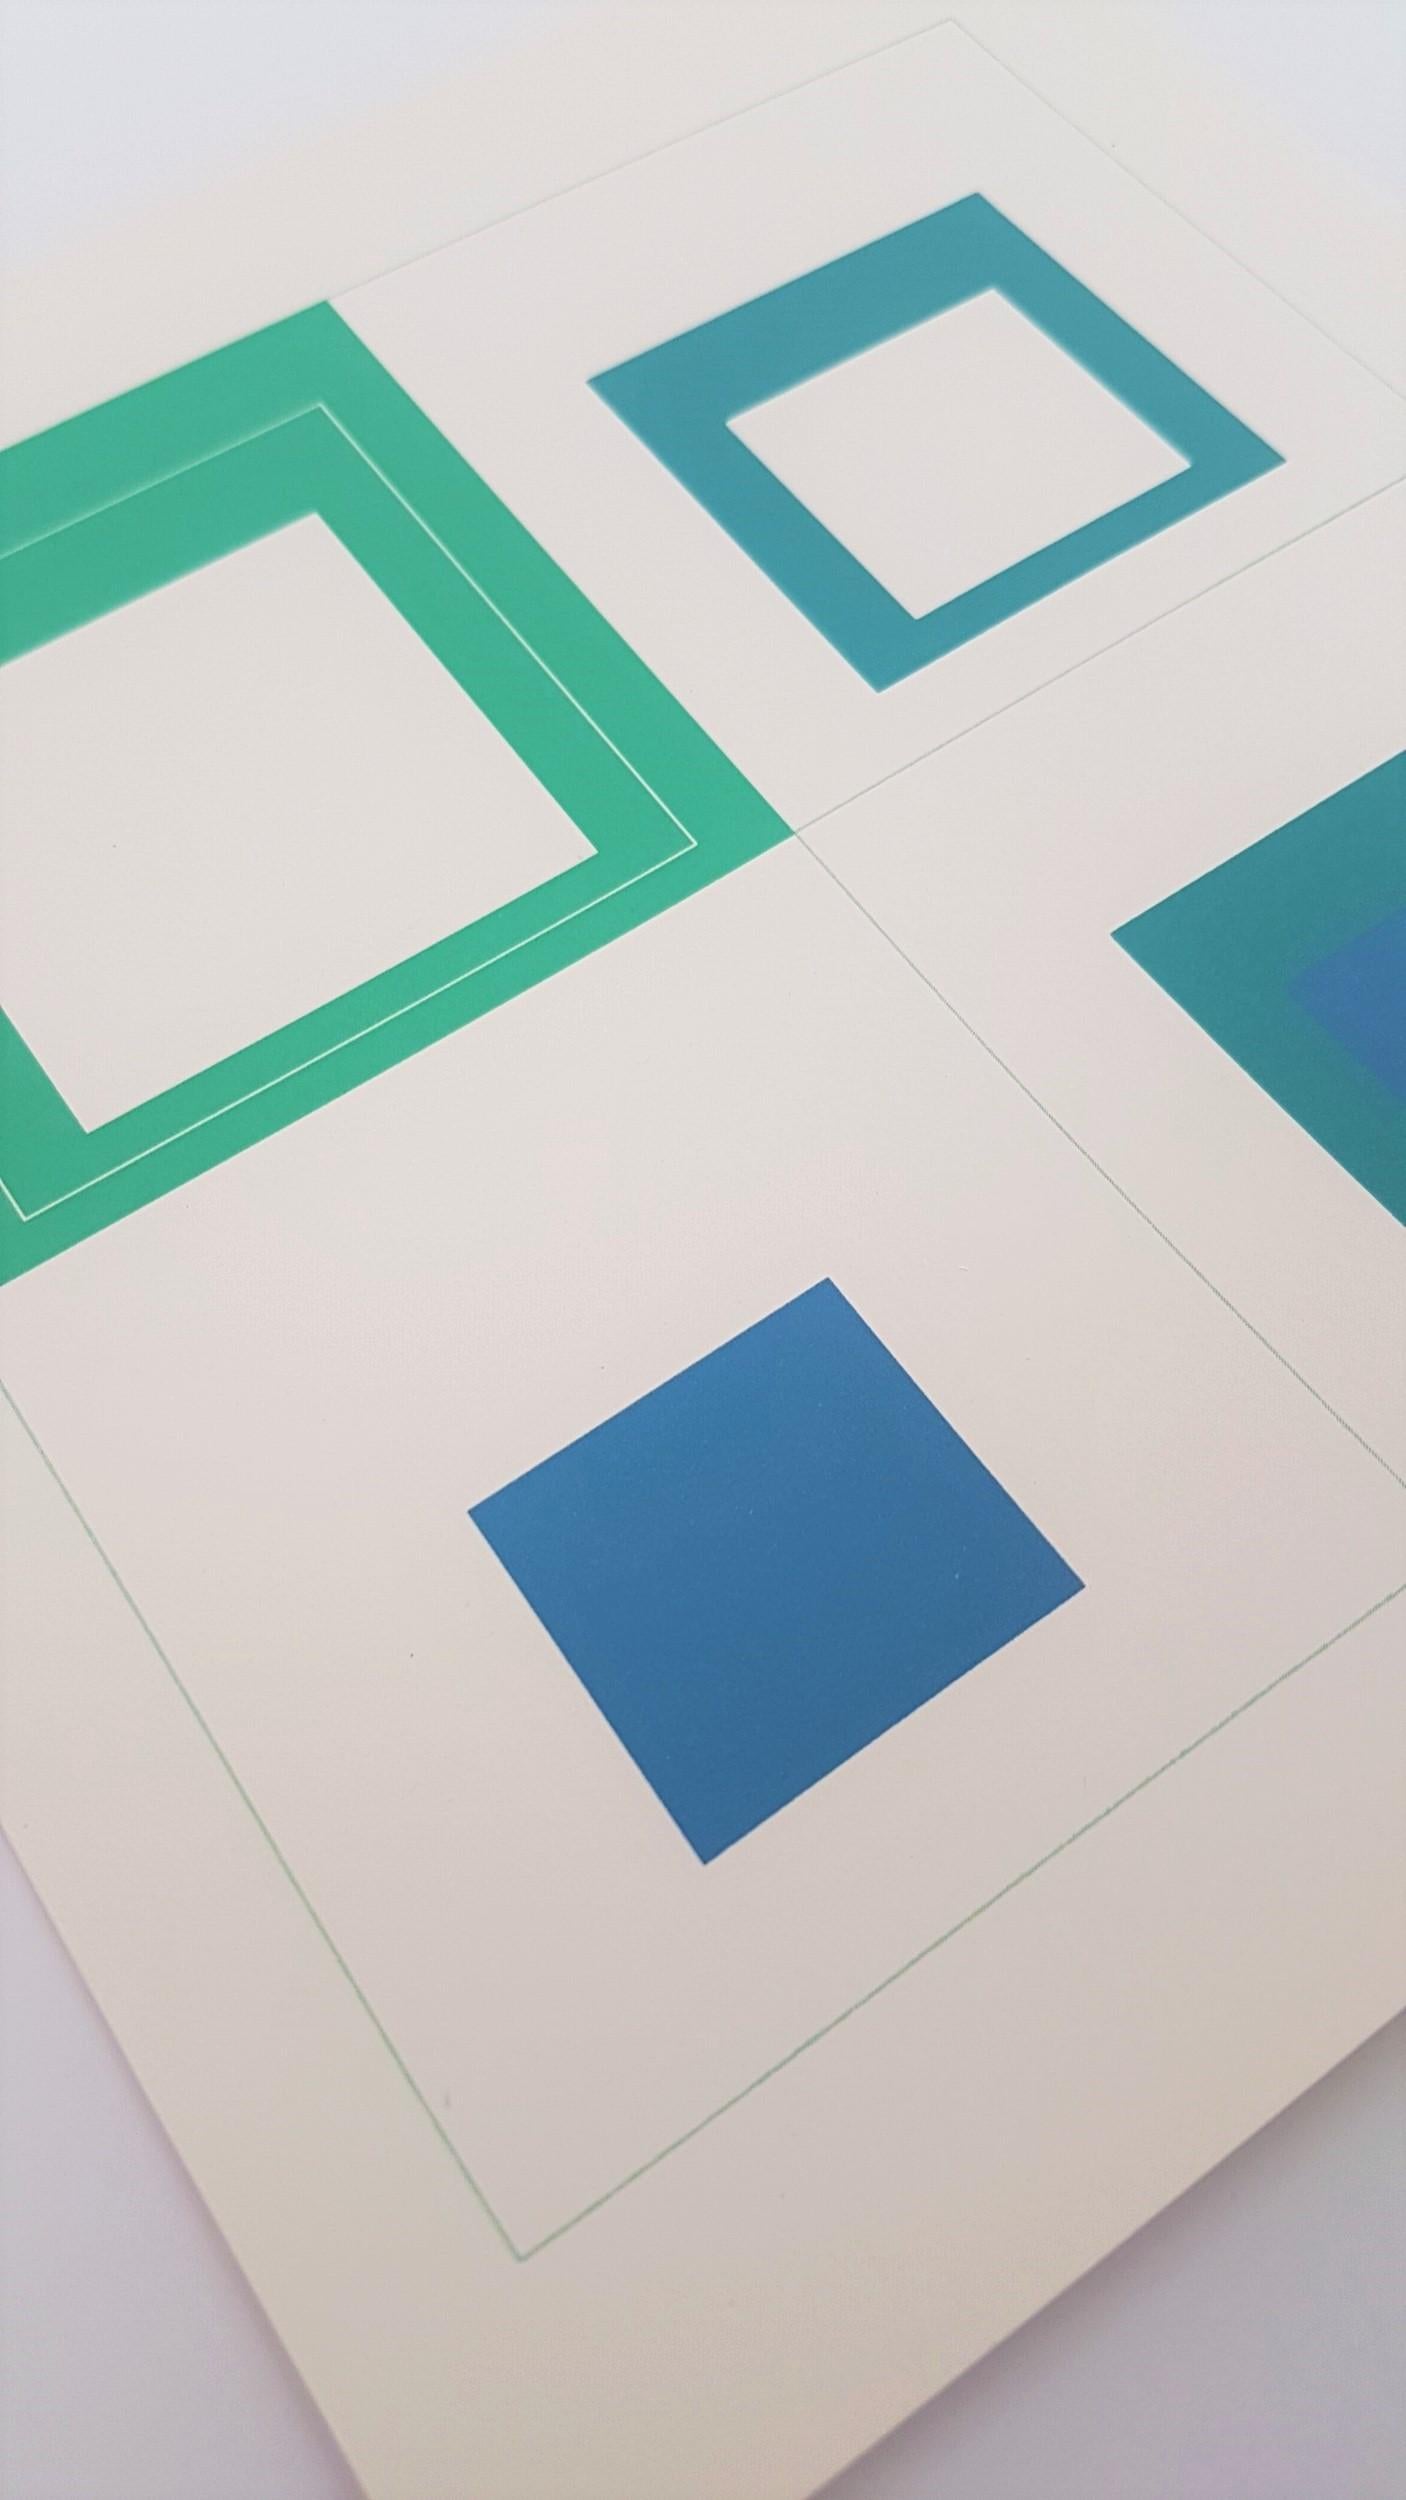 White Lines Squares (Bauhaus, Minimalist, Homage to the Square - 50% OFF) - Abstract Geometric Print by (after) Josef Albers